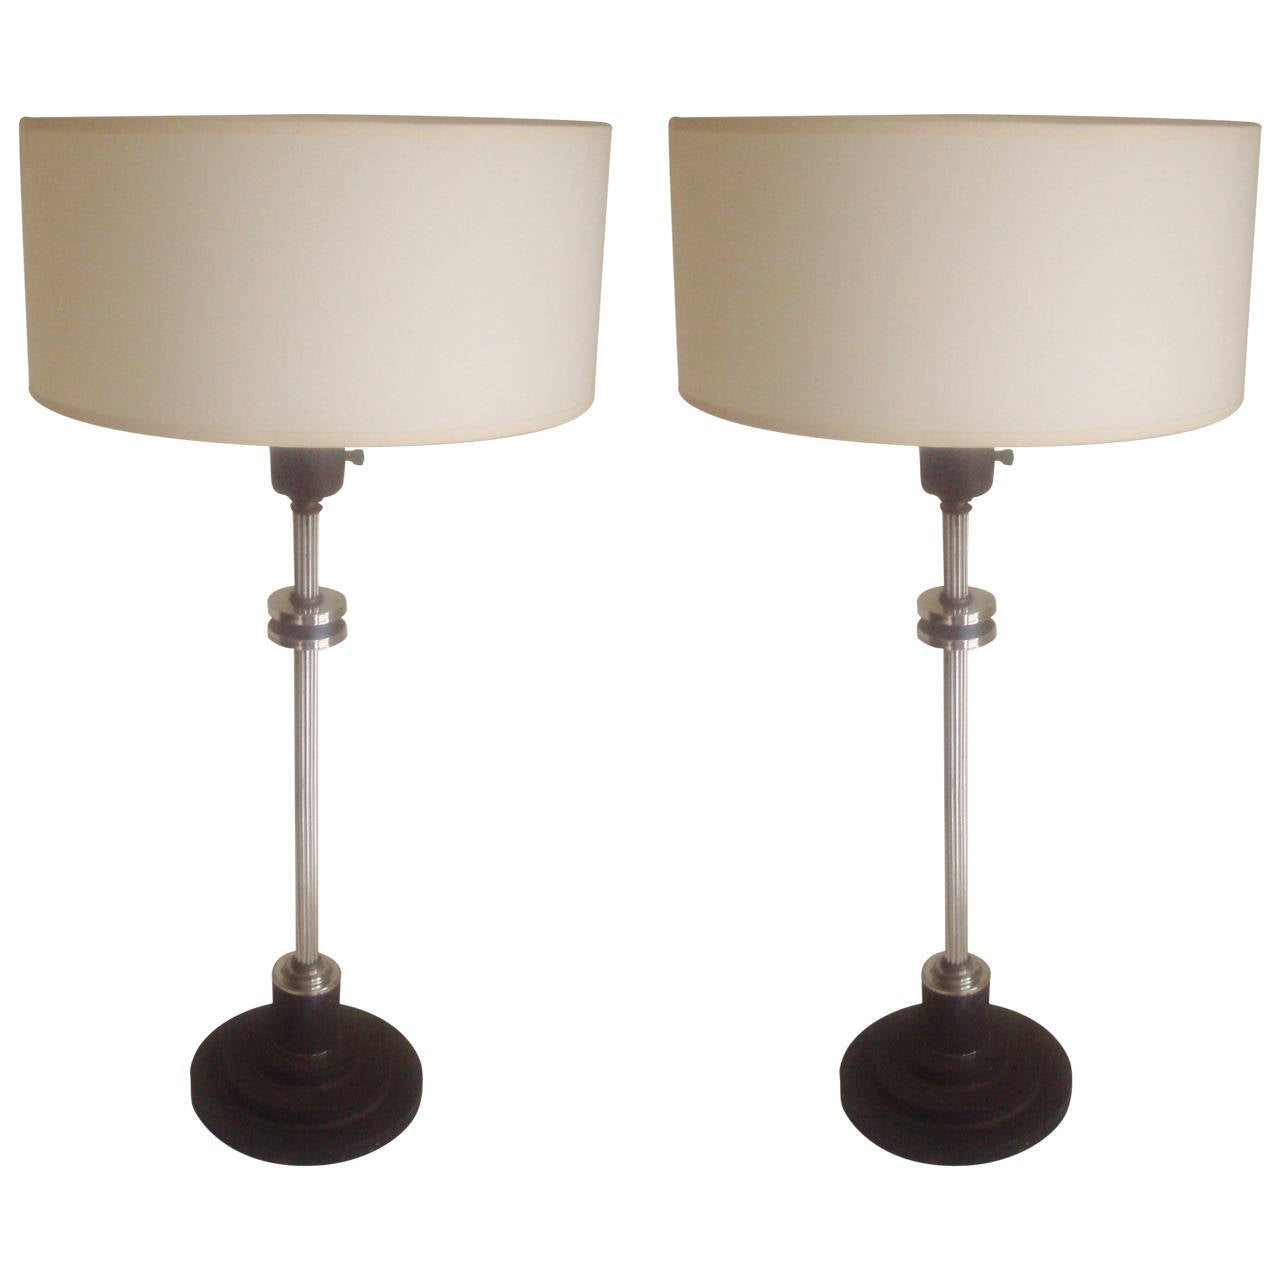 Pair of American Art Deco/Machine Age Tall Console Lamps.